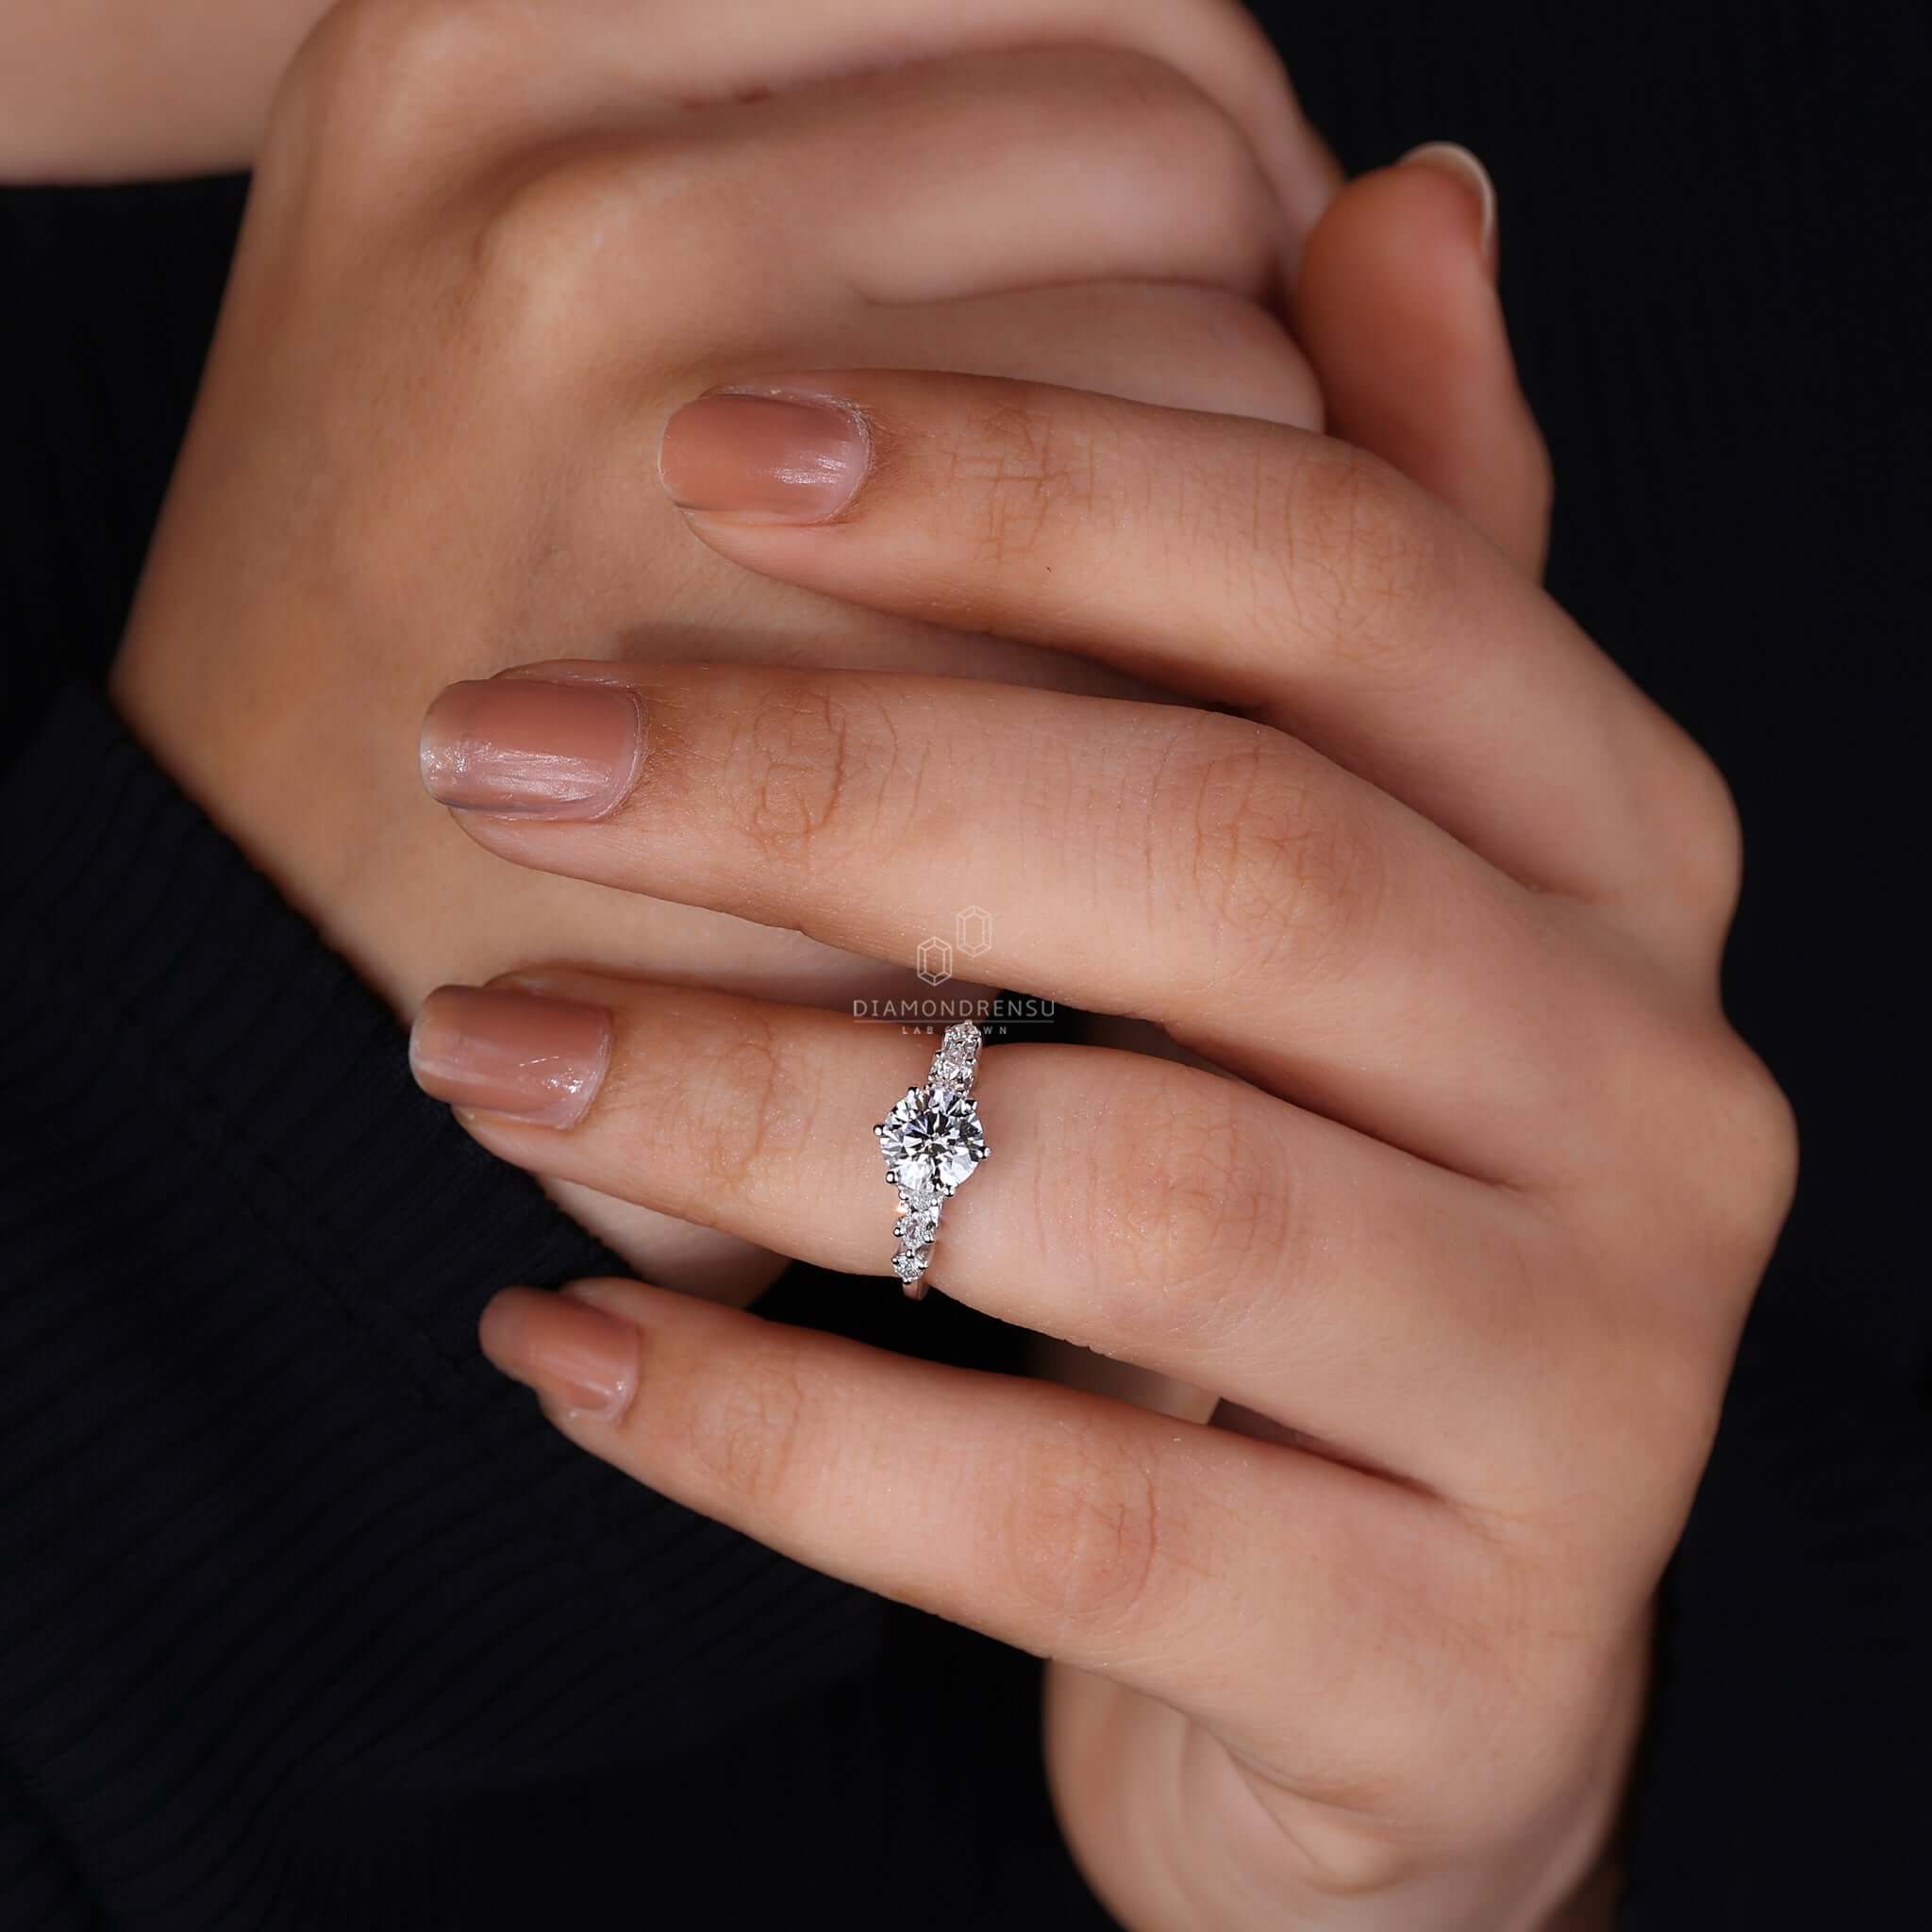 Hand gracefully showcasing a simple engagement ring, focusing on its refined and elegant style.